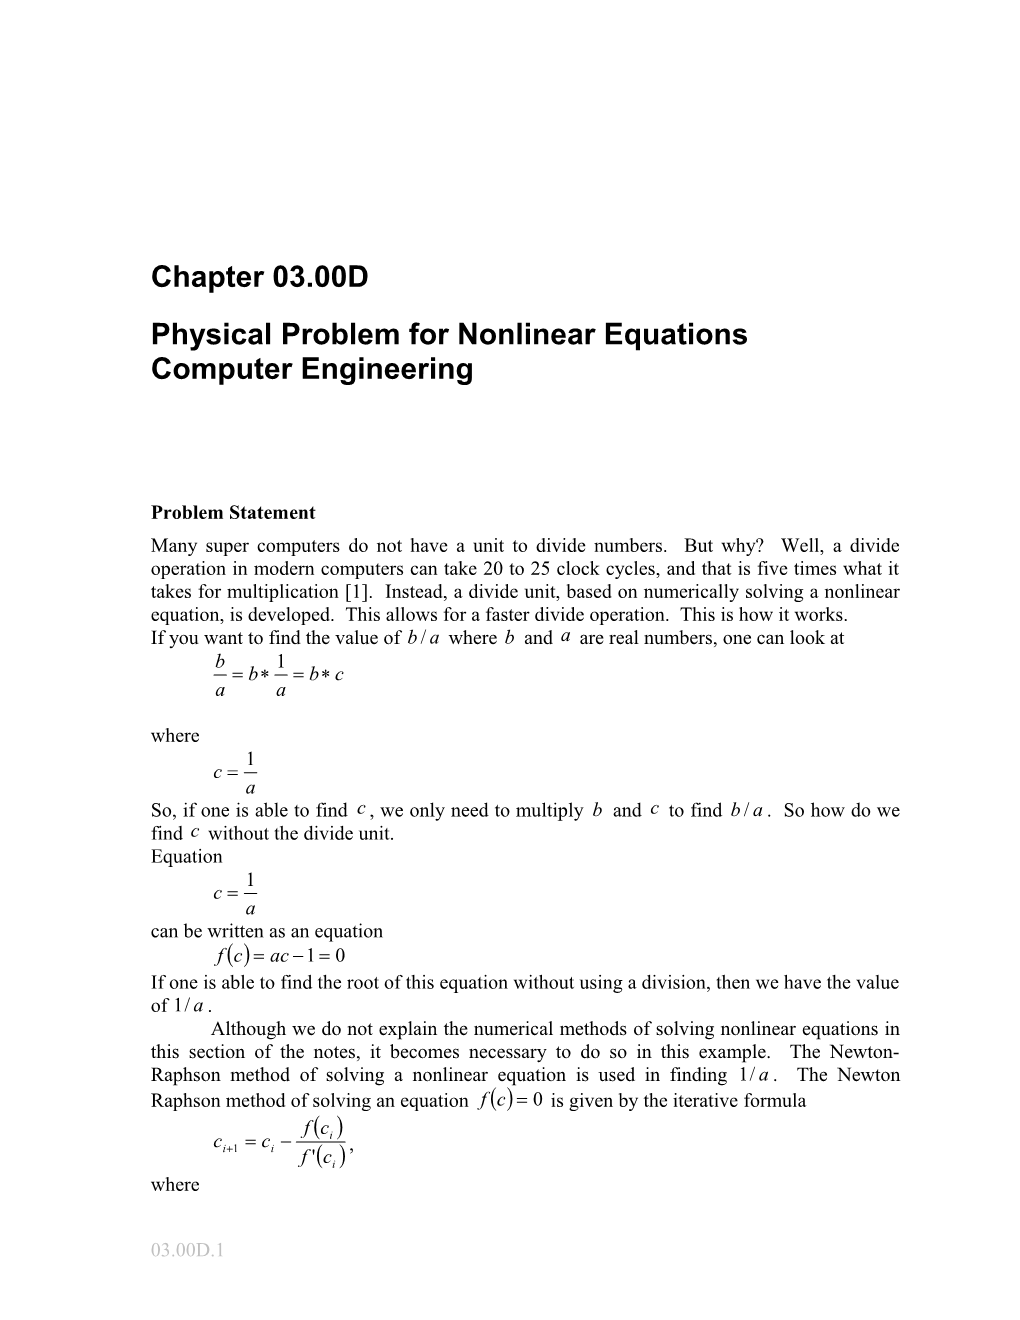 Physical Problem for Nonlinear Equations: Computer Engineering